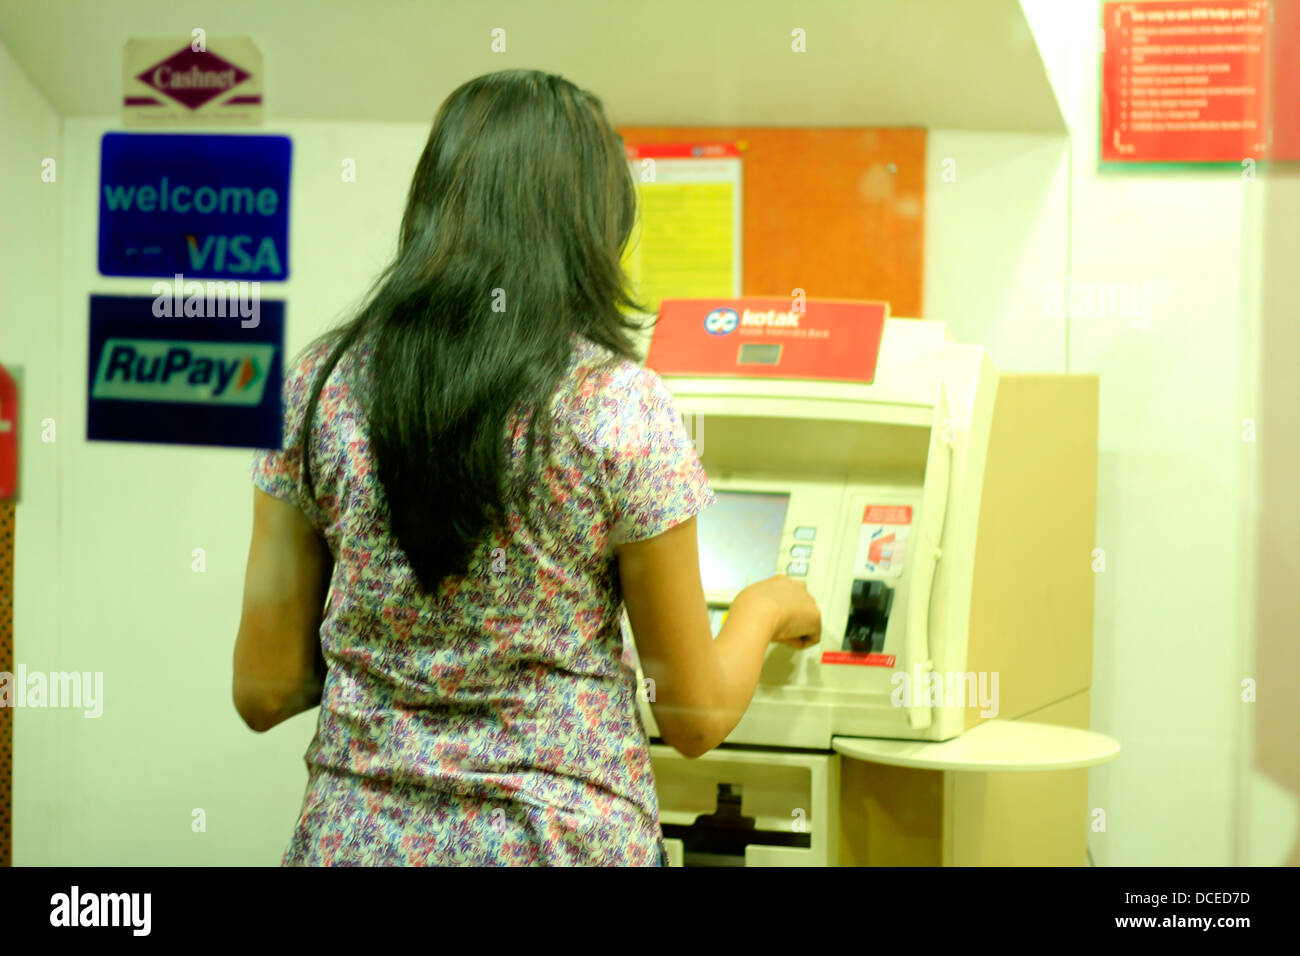 Indian woman withdrawing money from an ATM machine, Bangalore, India Stock Photo